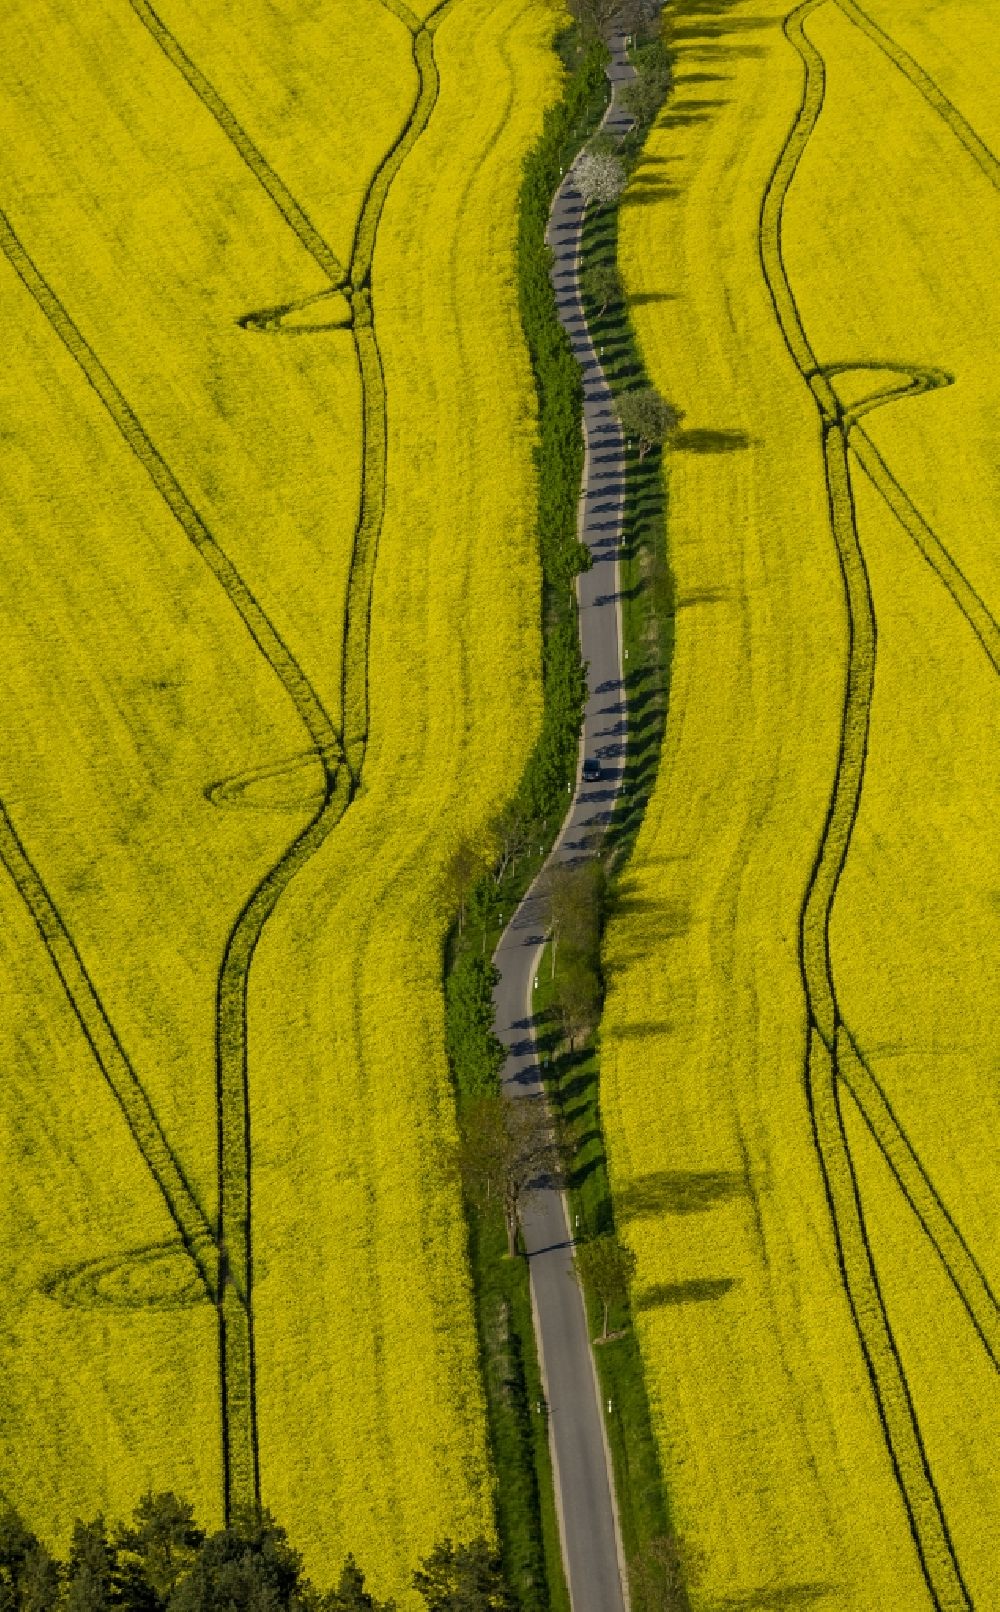 Wesenberg from the bird's eye view: Yellow radiant rapeseed field landscape near Wesenberg in the state of Mecklenburg-Western Pomerania